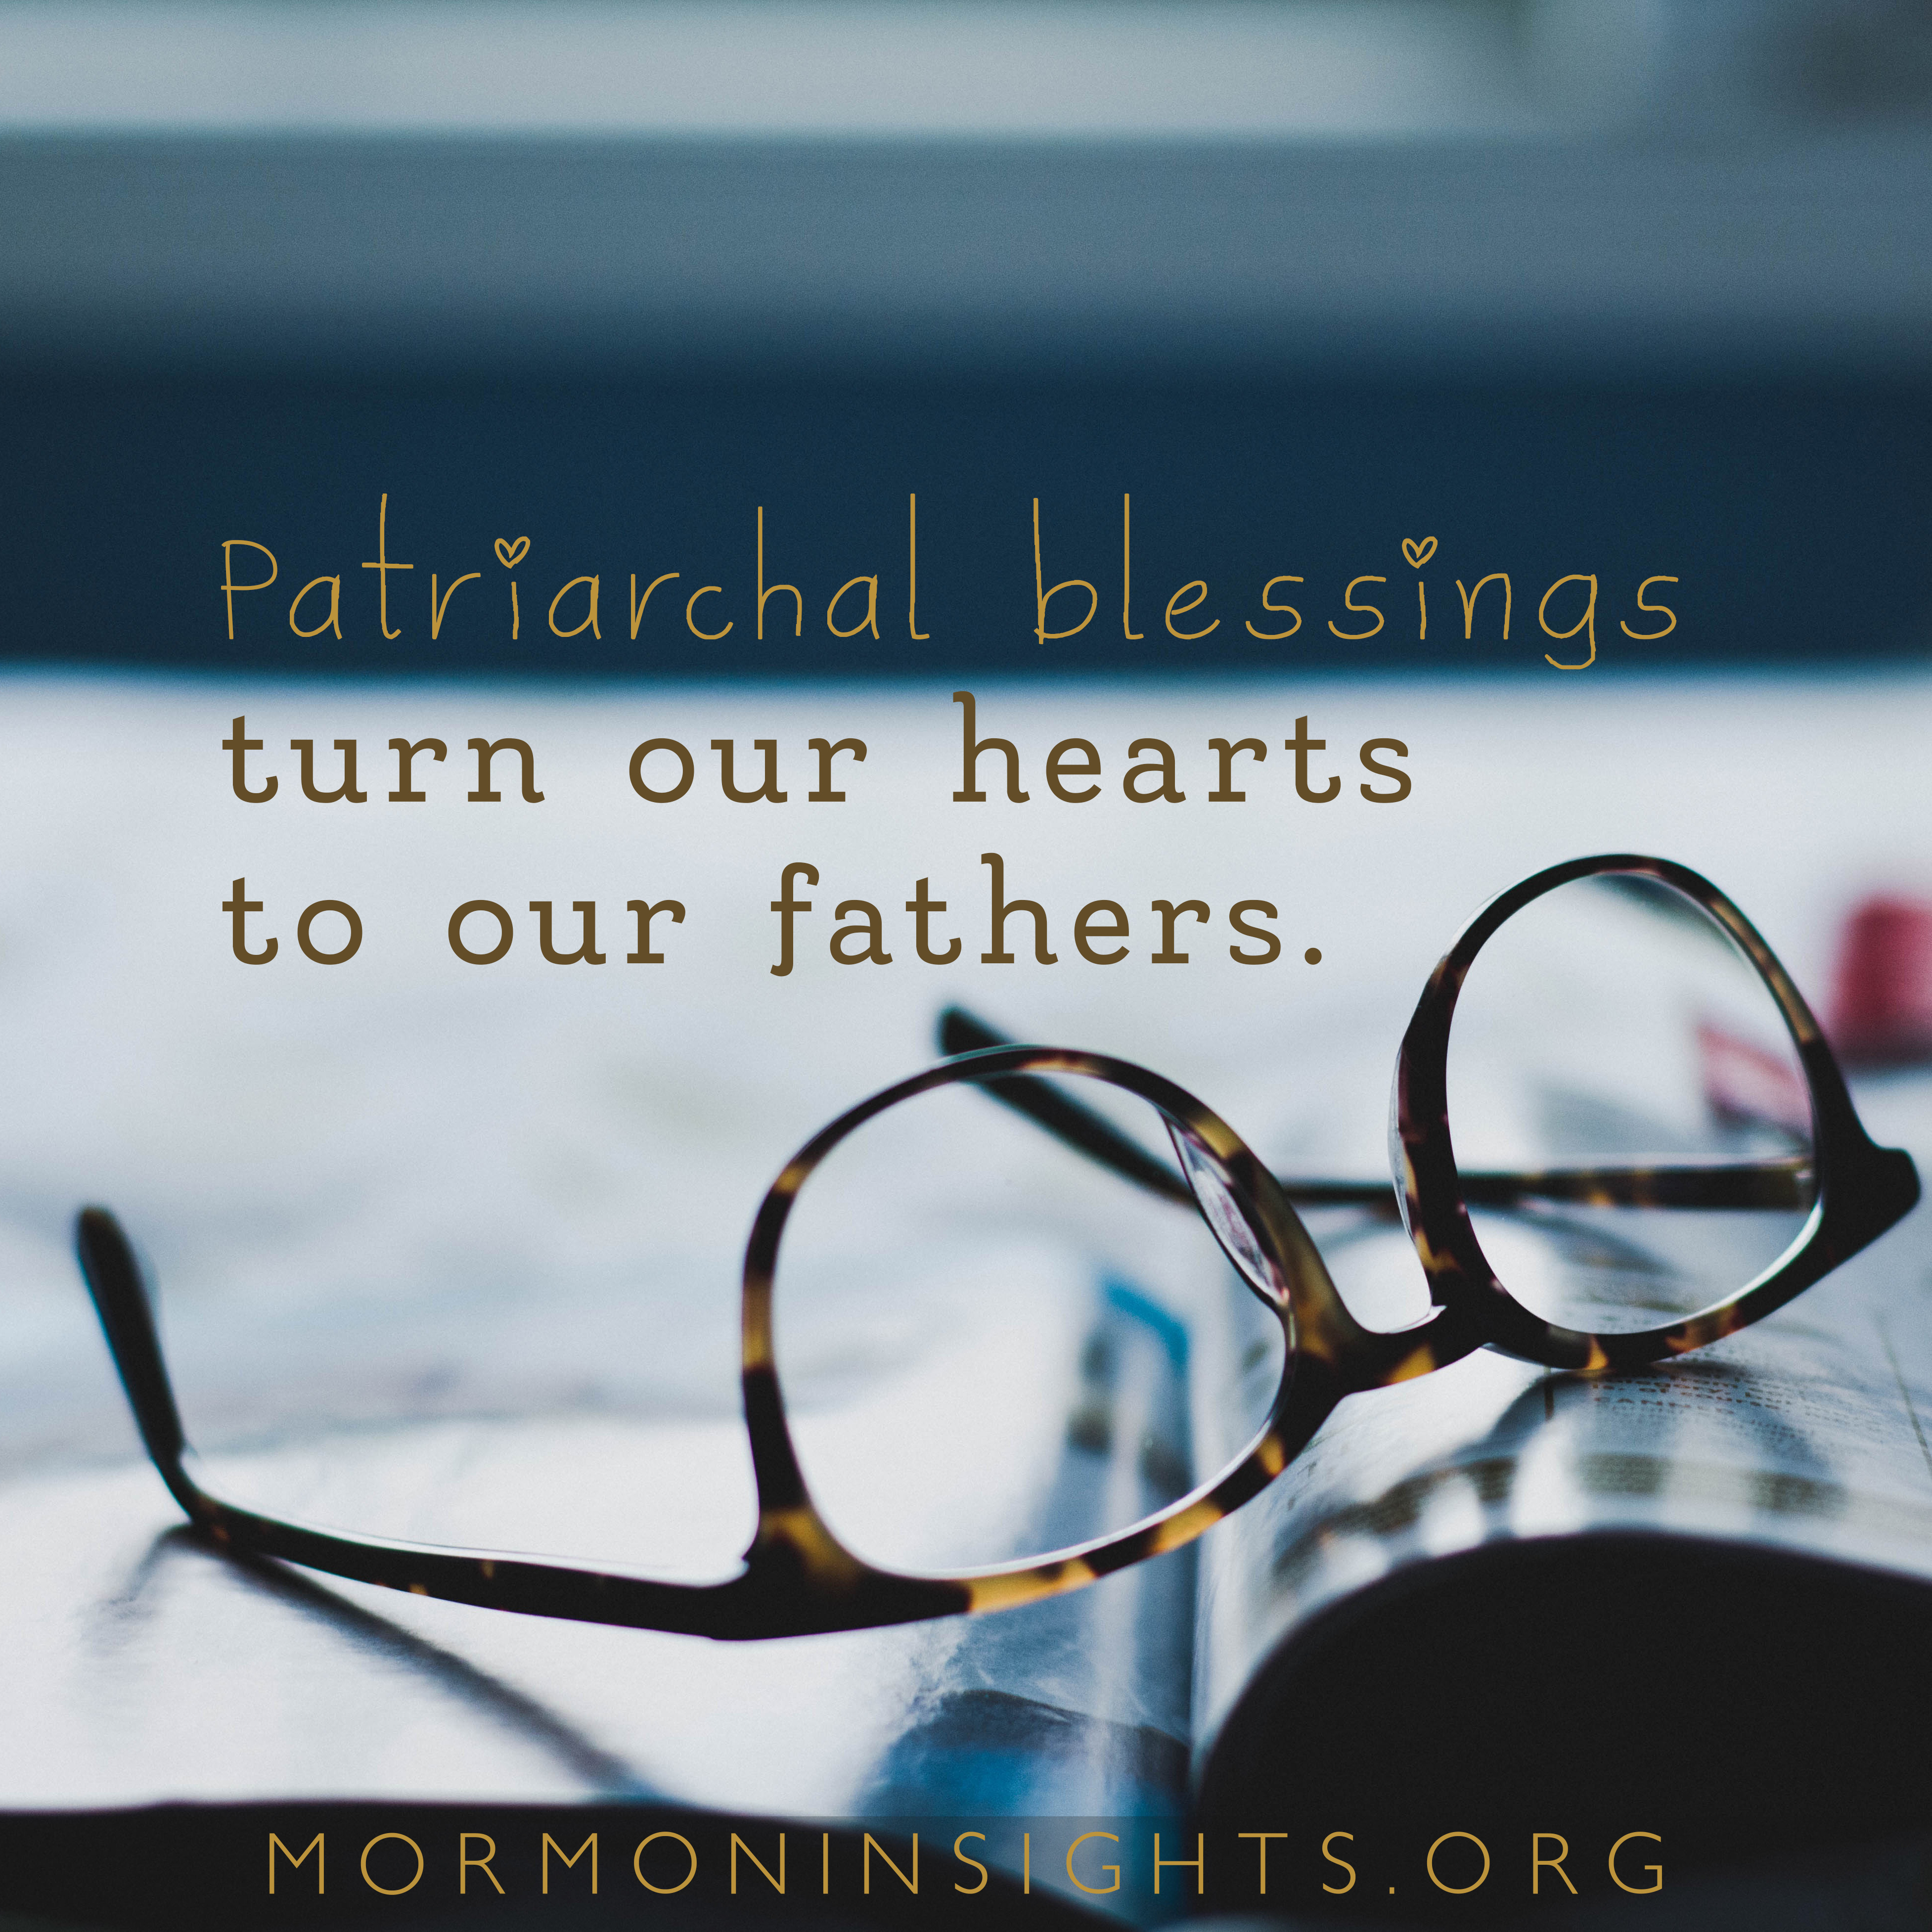 "patriarchal blessings turn our hearts to our fathers." glasses